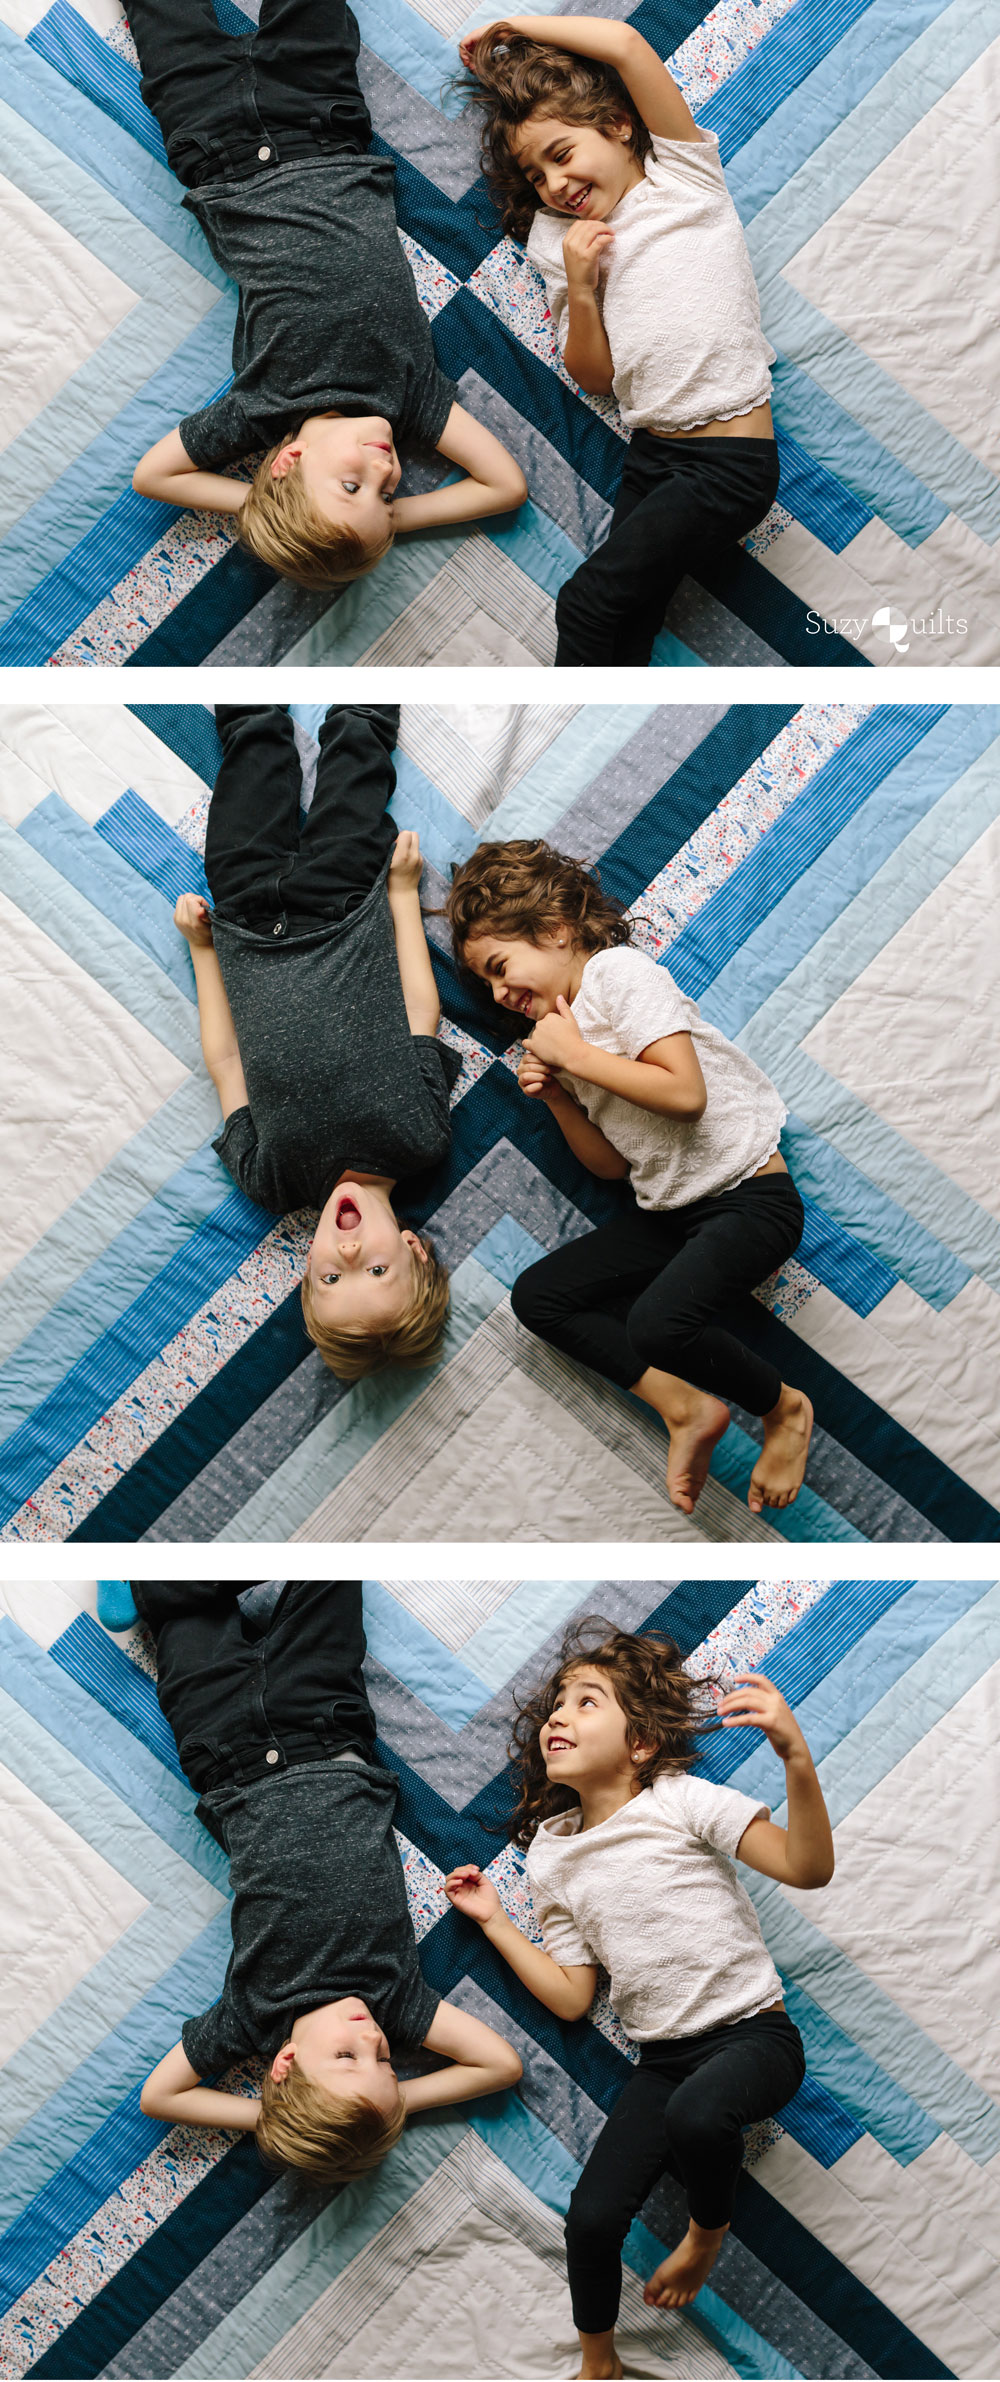 The Sugar POP quilt pattern is a PDF download that includes throw, baby and a pillow size. This modern design works well as a gradient or with fabric scraps. It's also perfect for hand quilting.